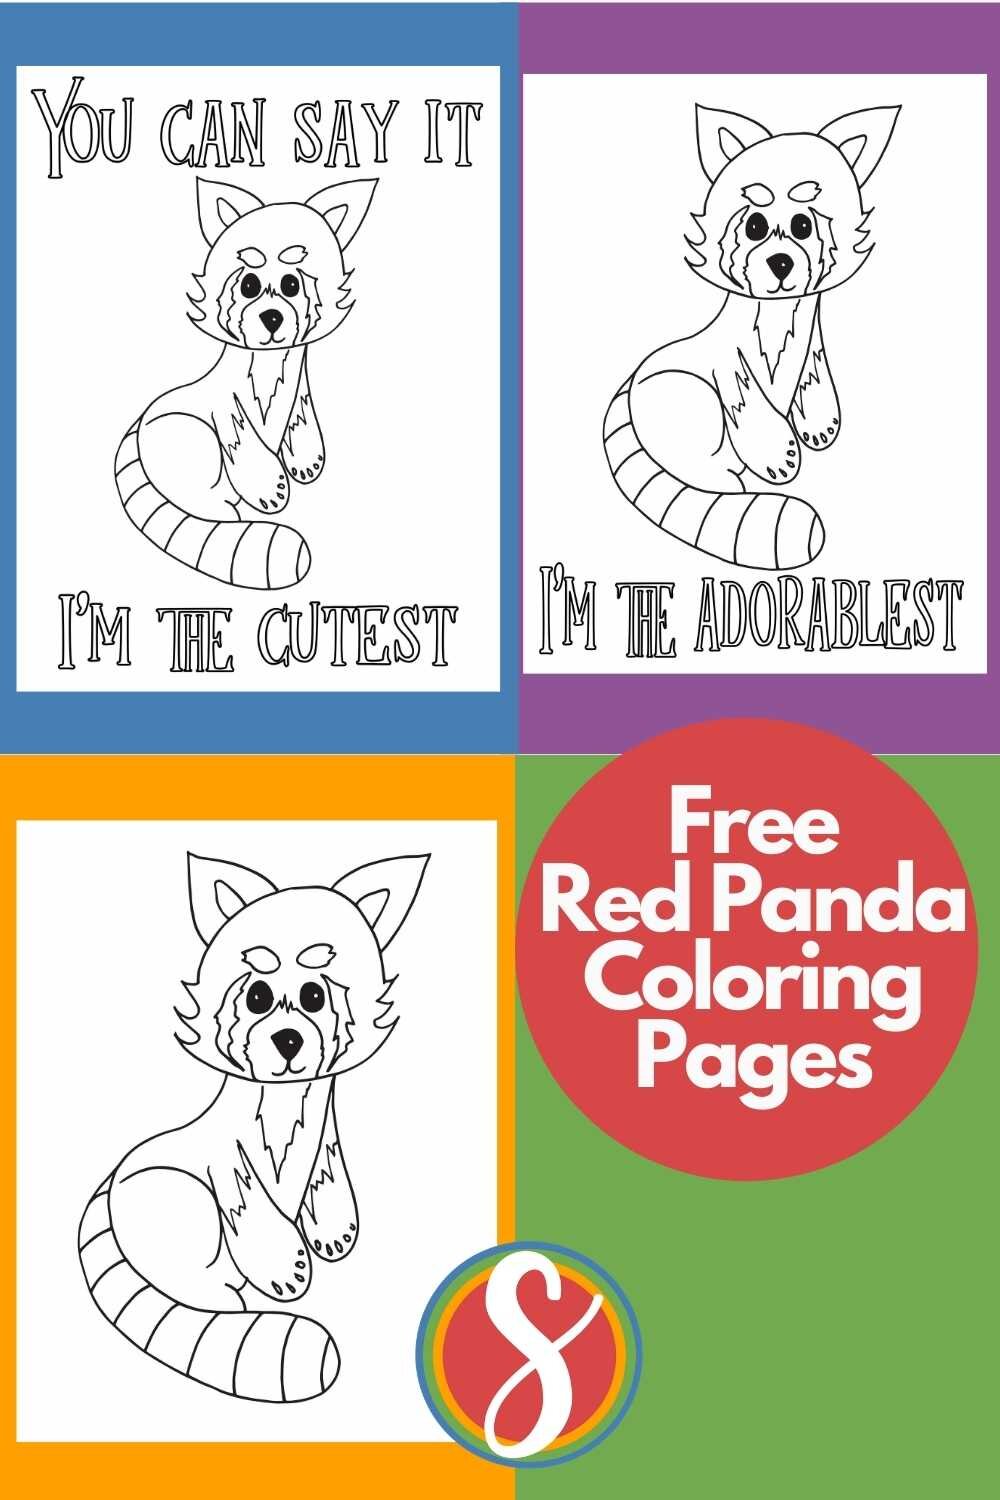 Free printable red panda coloring pages from Stevie Doodles - free red panda sheets to print and color today